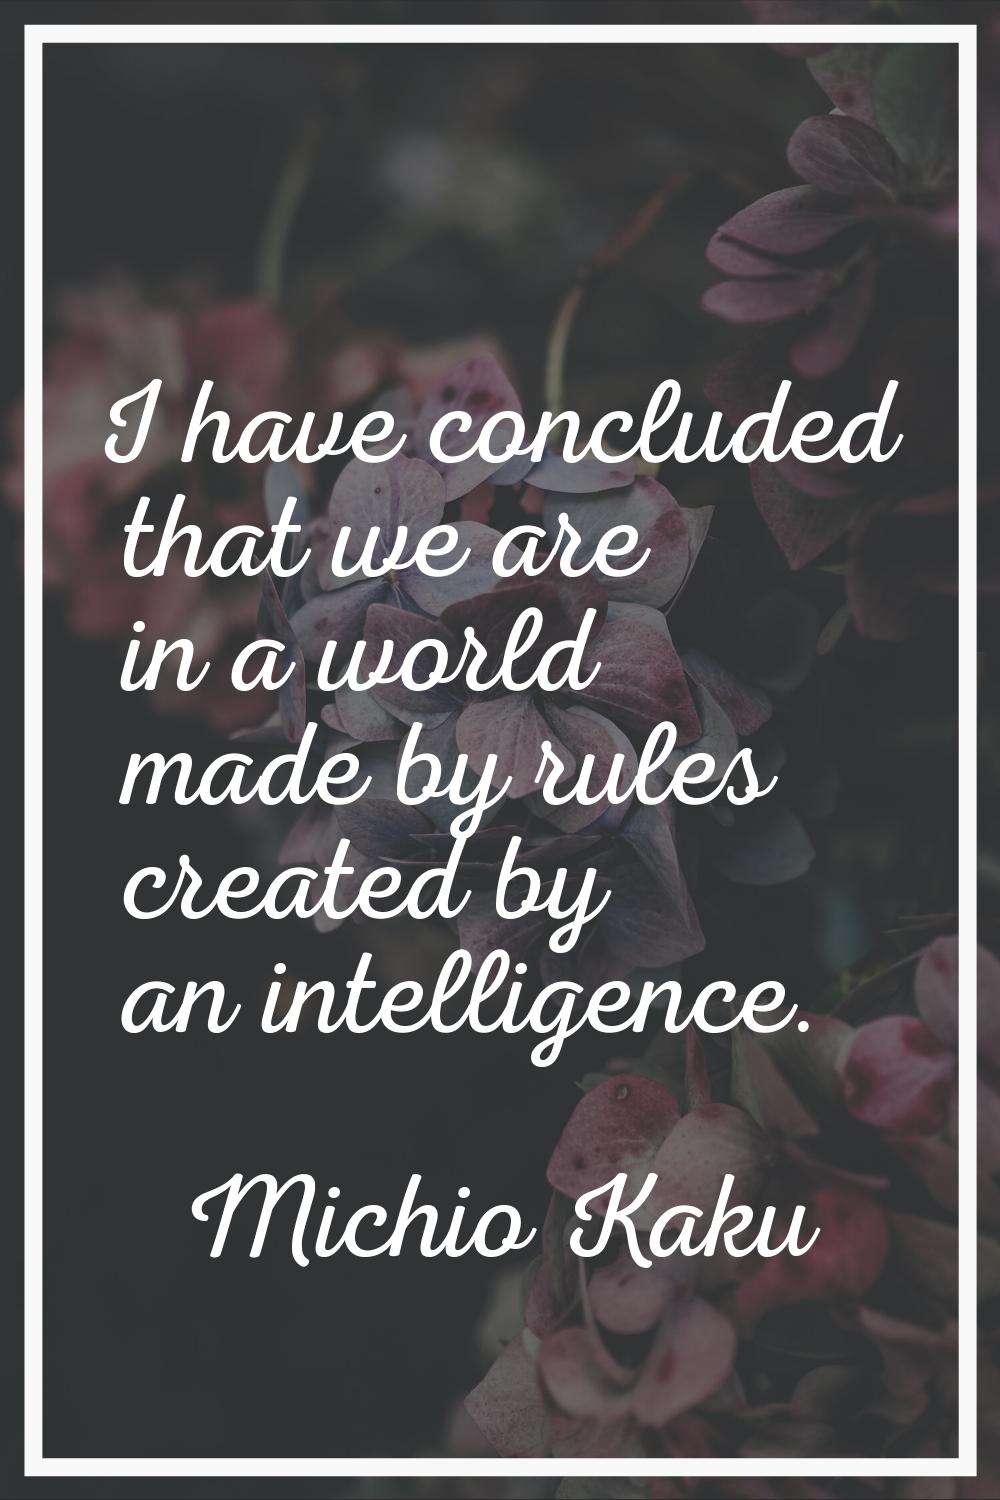 I have concluded that we are in a world made by rules created by an intelligence.